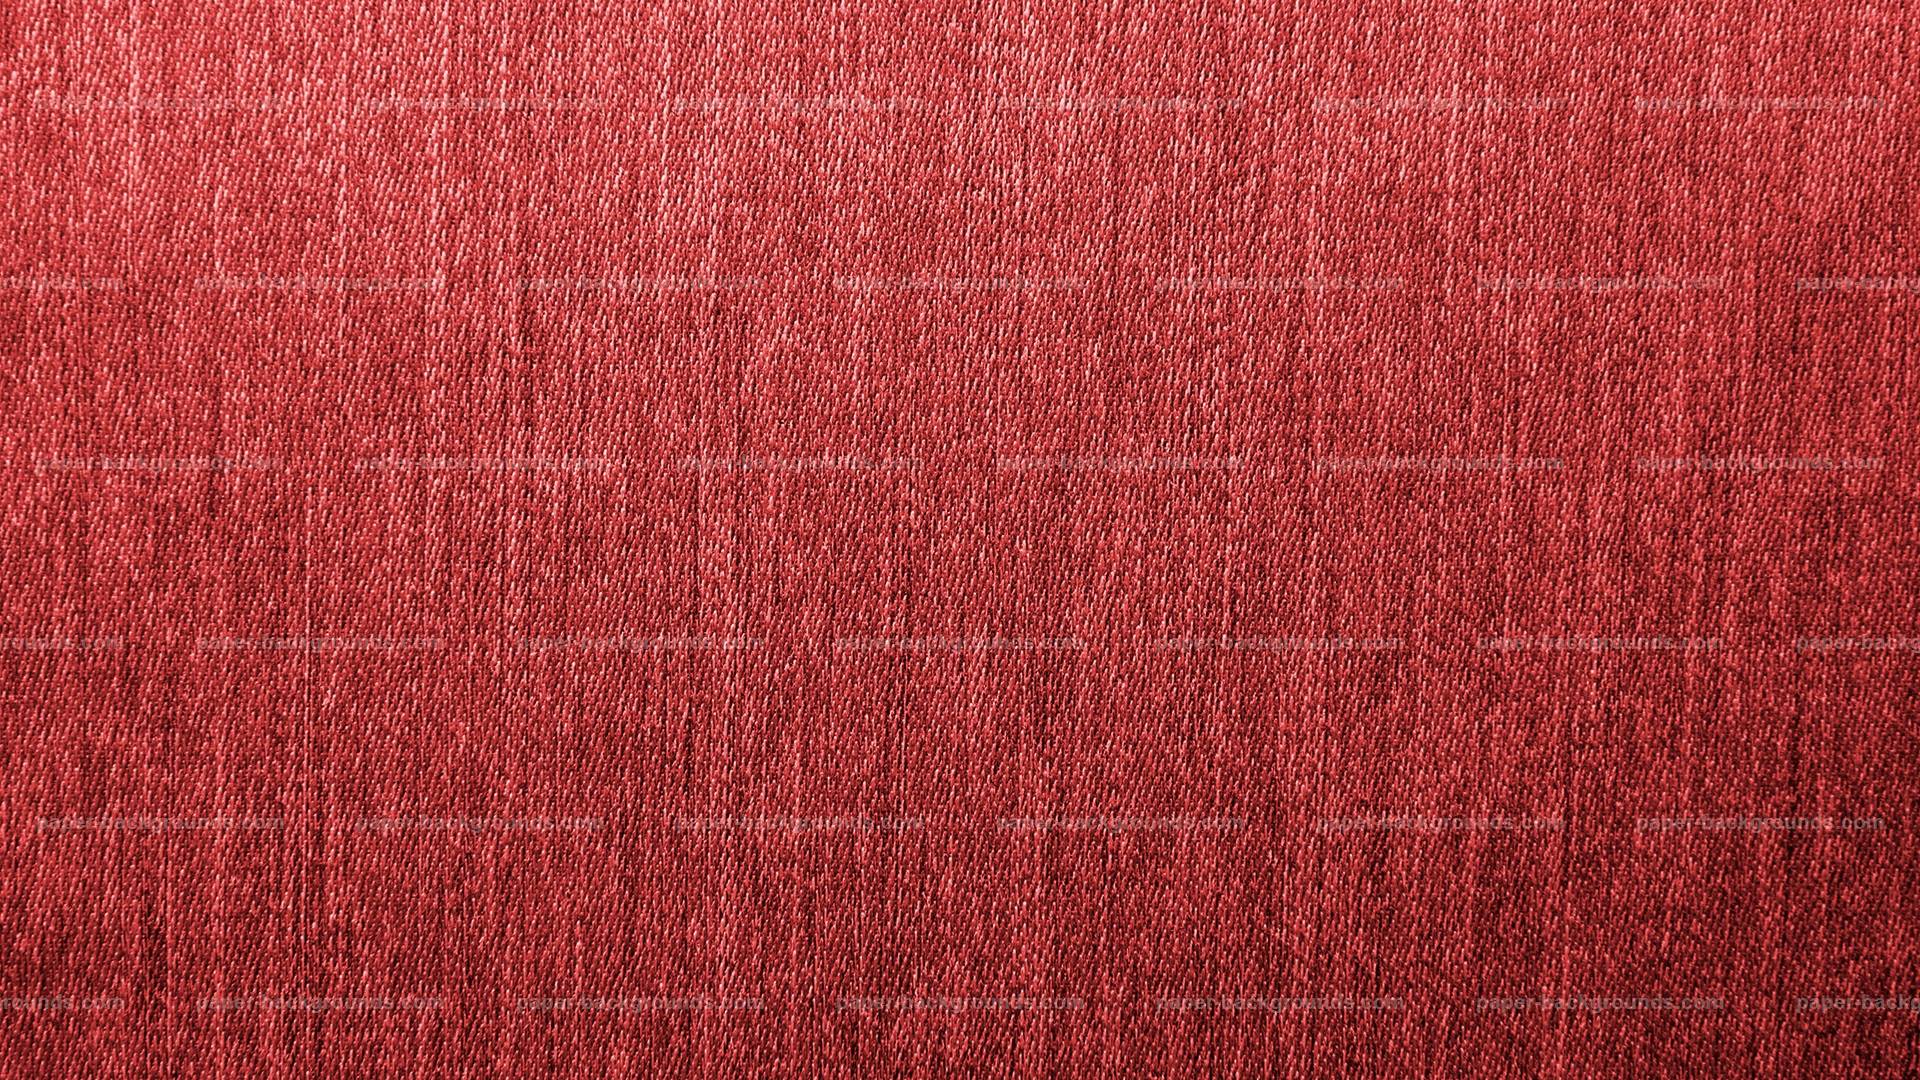 Background, Texture, Canvas, Red, Wallpaper, Textured